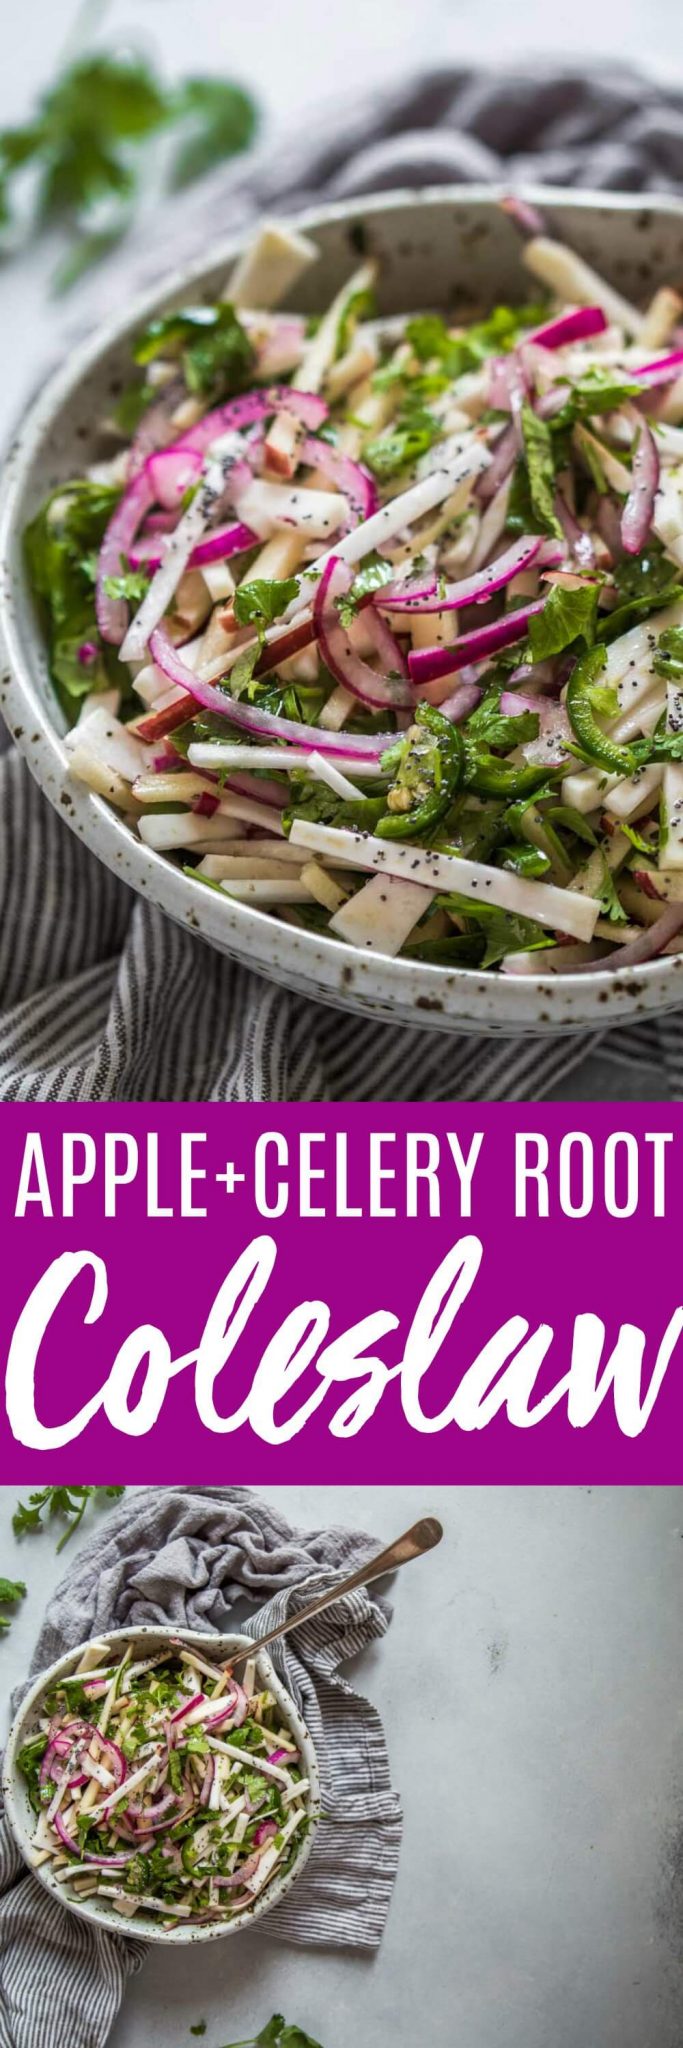 Apple Slaw with Celery Root is an exciting twist on your basic coleslaw. Crisp apples and celery root combine with jalapeno, cilantro & pickled onions. It's sure to be a stand out side dish! #slaw #coleslaw #sidedish #appleslaw #celeryroot #vegetarian